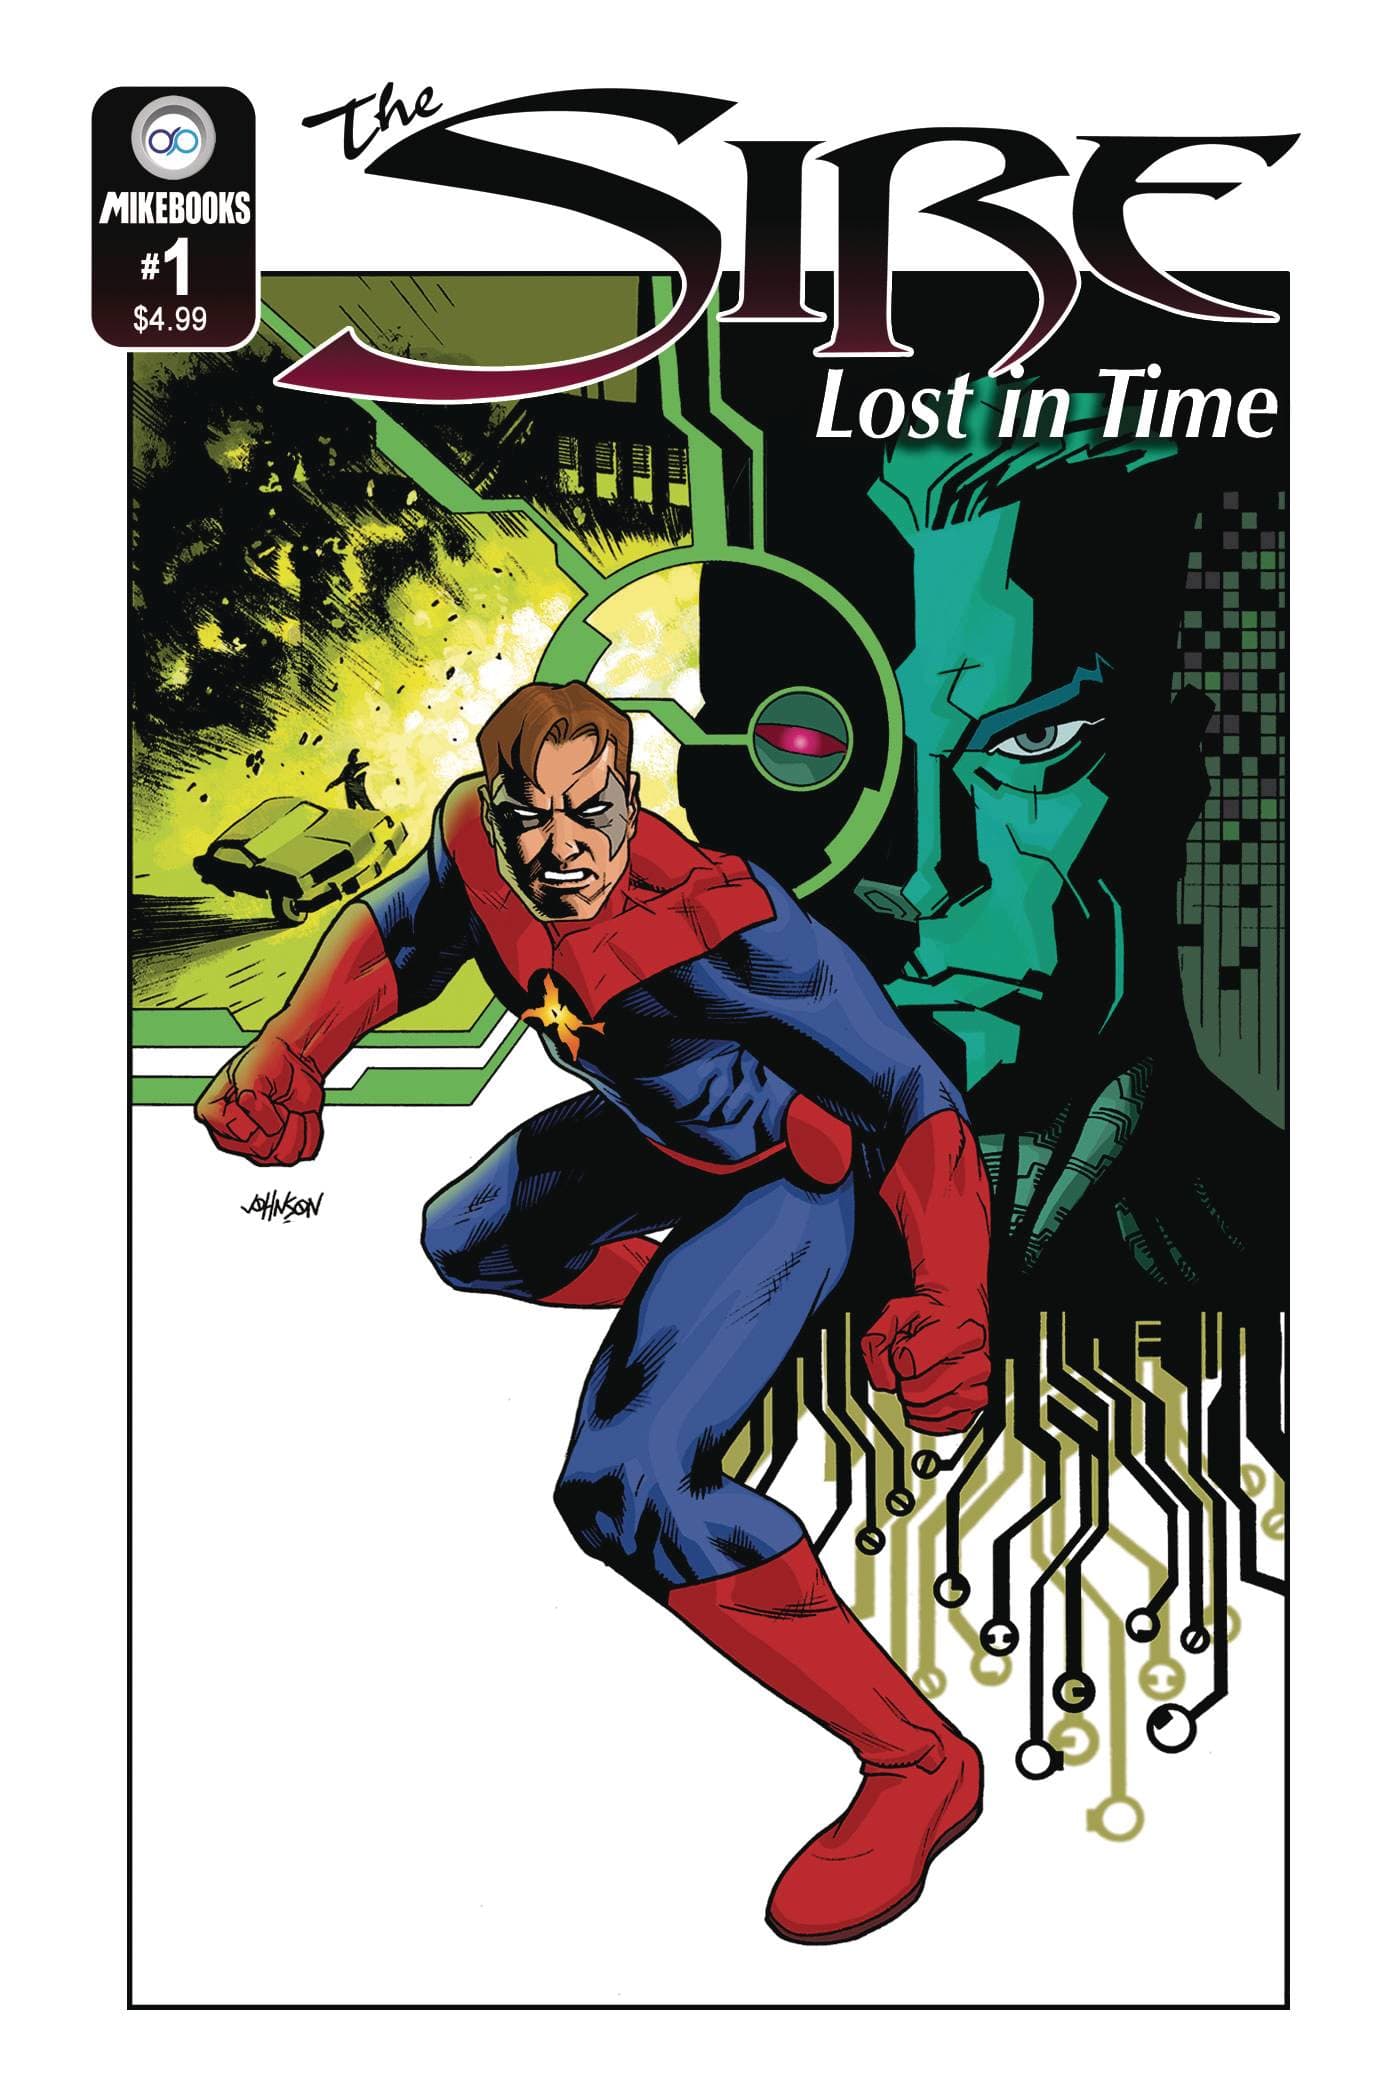 SIRE LOST IN TIME #1 (OF 4)